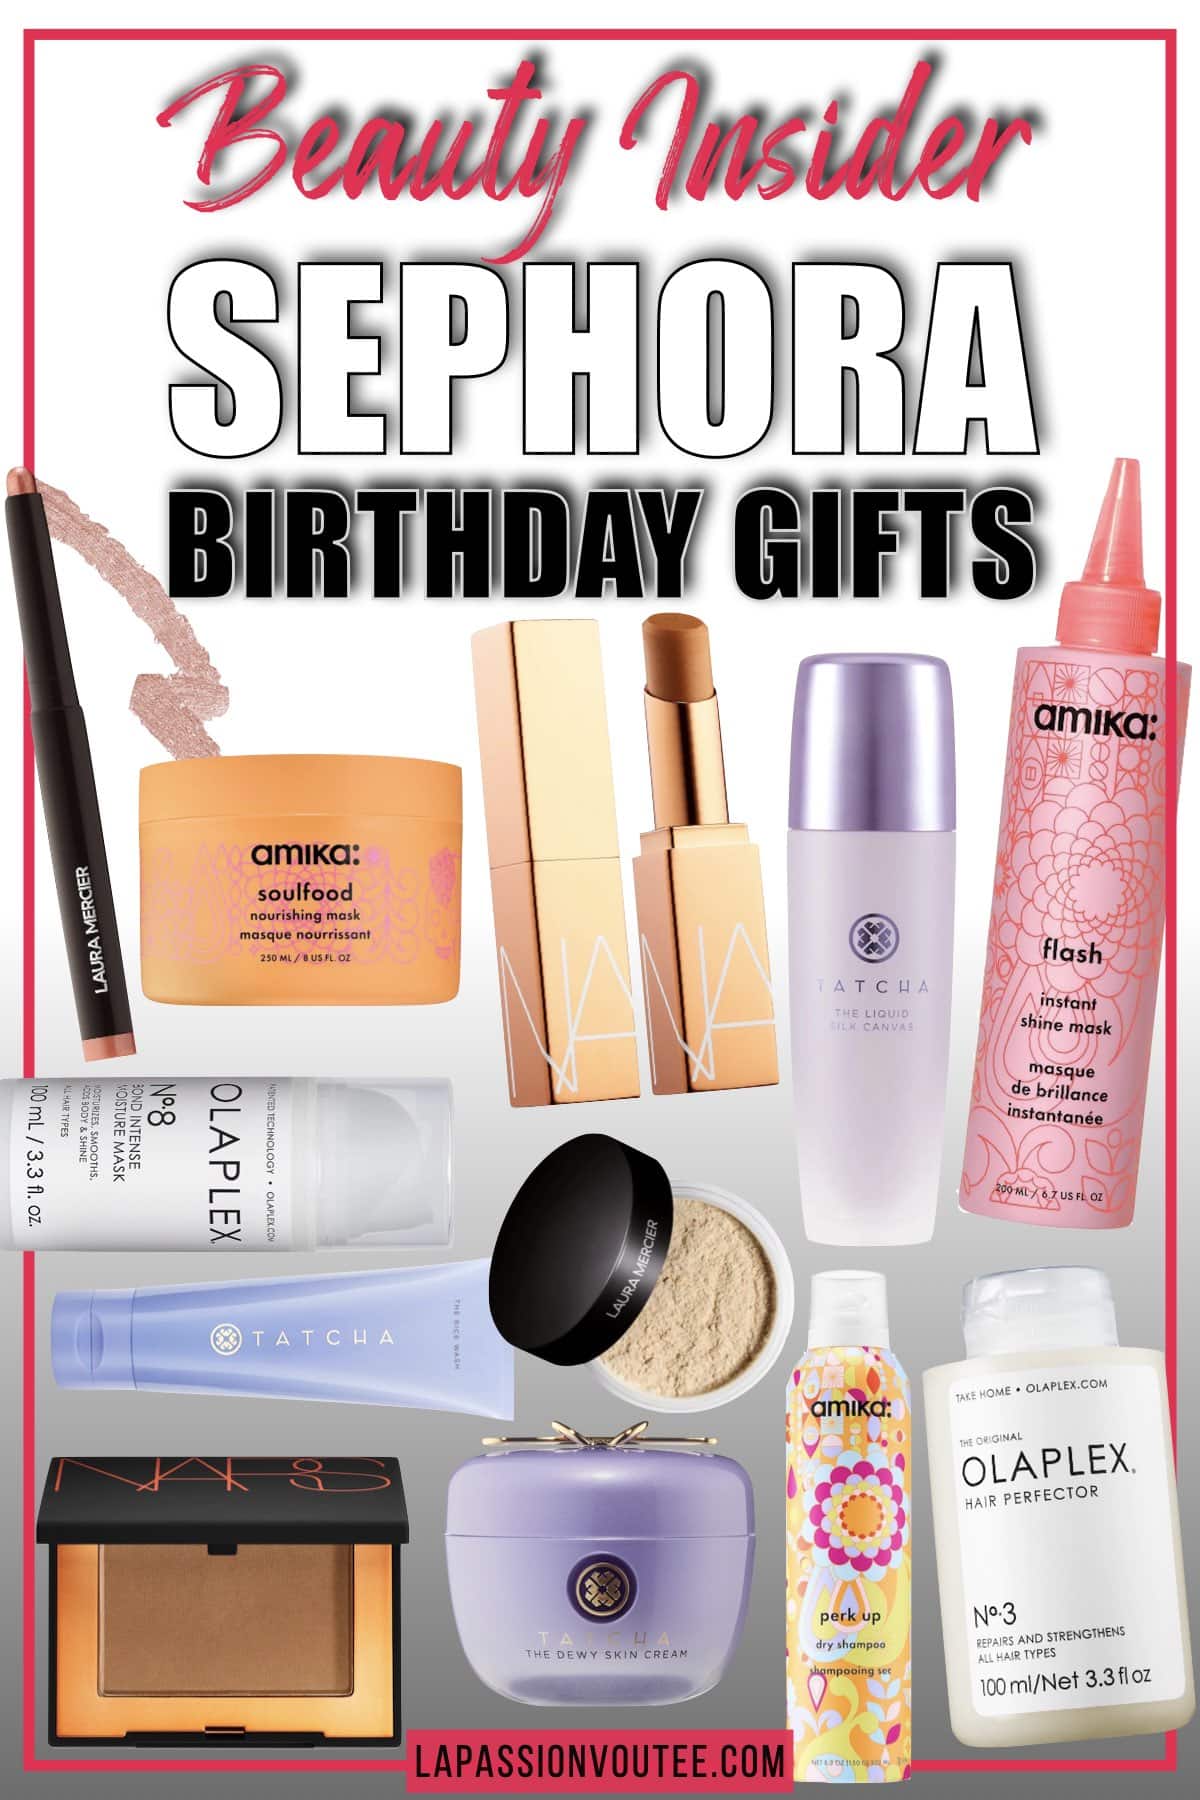 Sephora Birthday Gift 2022 Revealed: This Year’s Lineup Is SOOO Good!